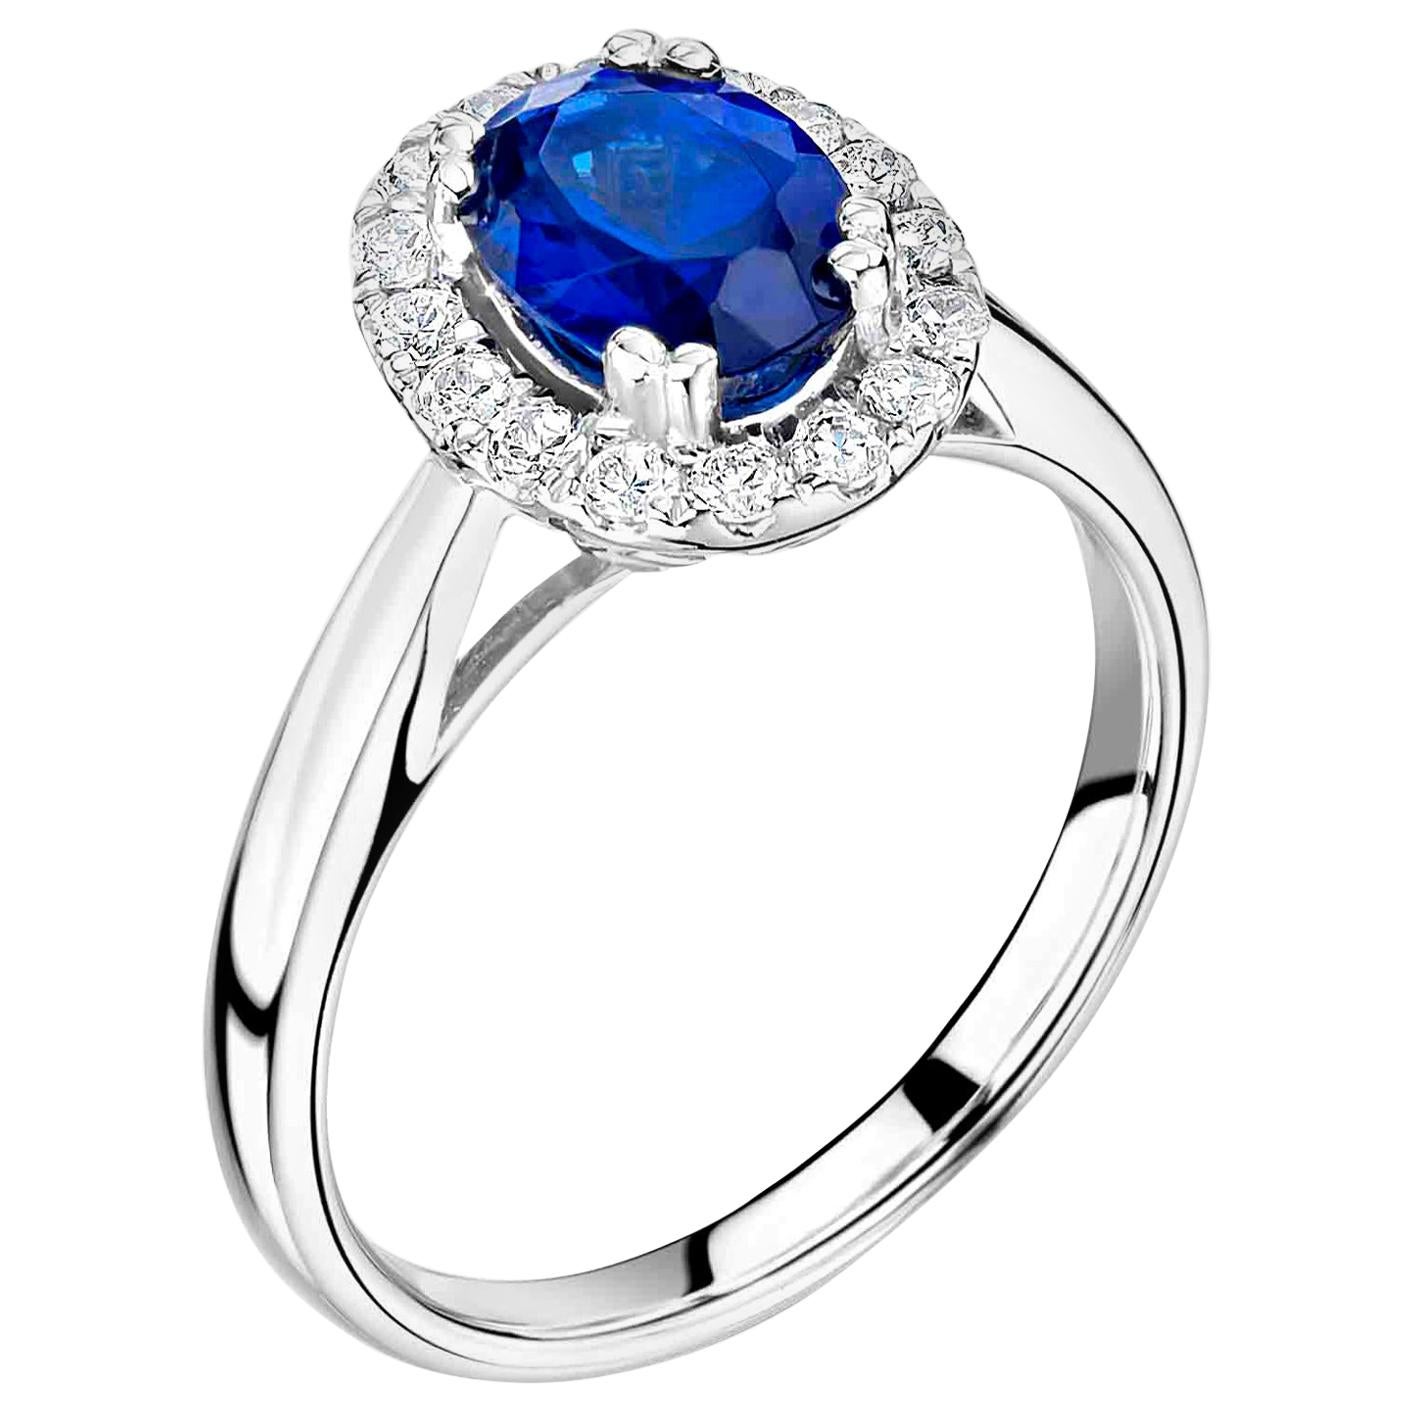 1 Carat Royal Blue Ceylon Sapphire Engagement Ring in a Diamond Halo For Sale